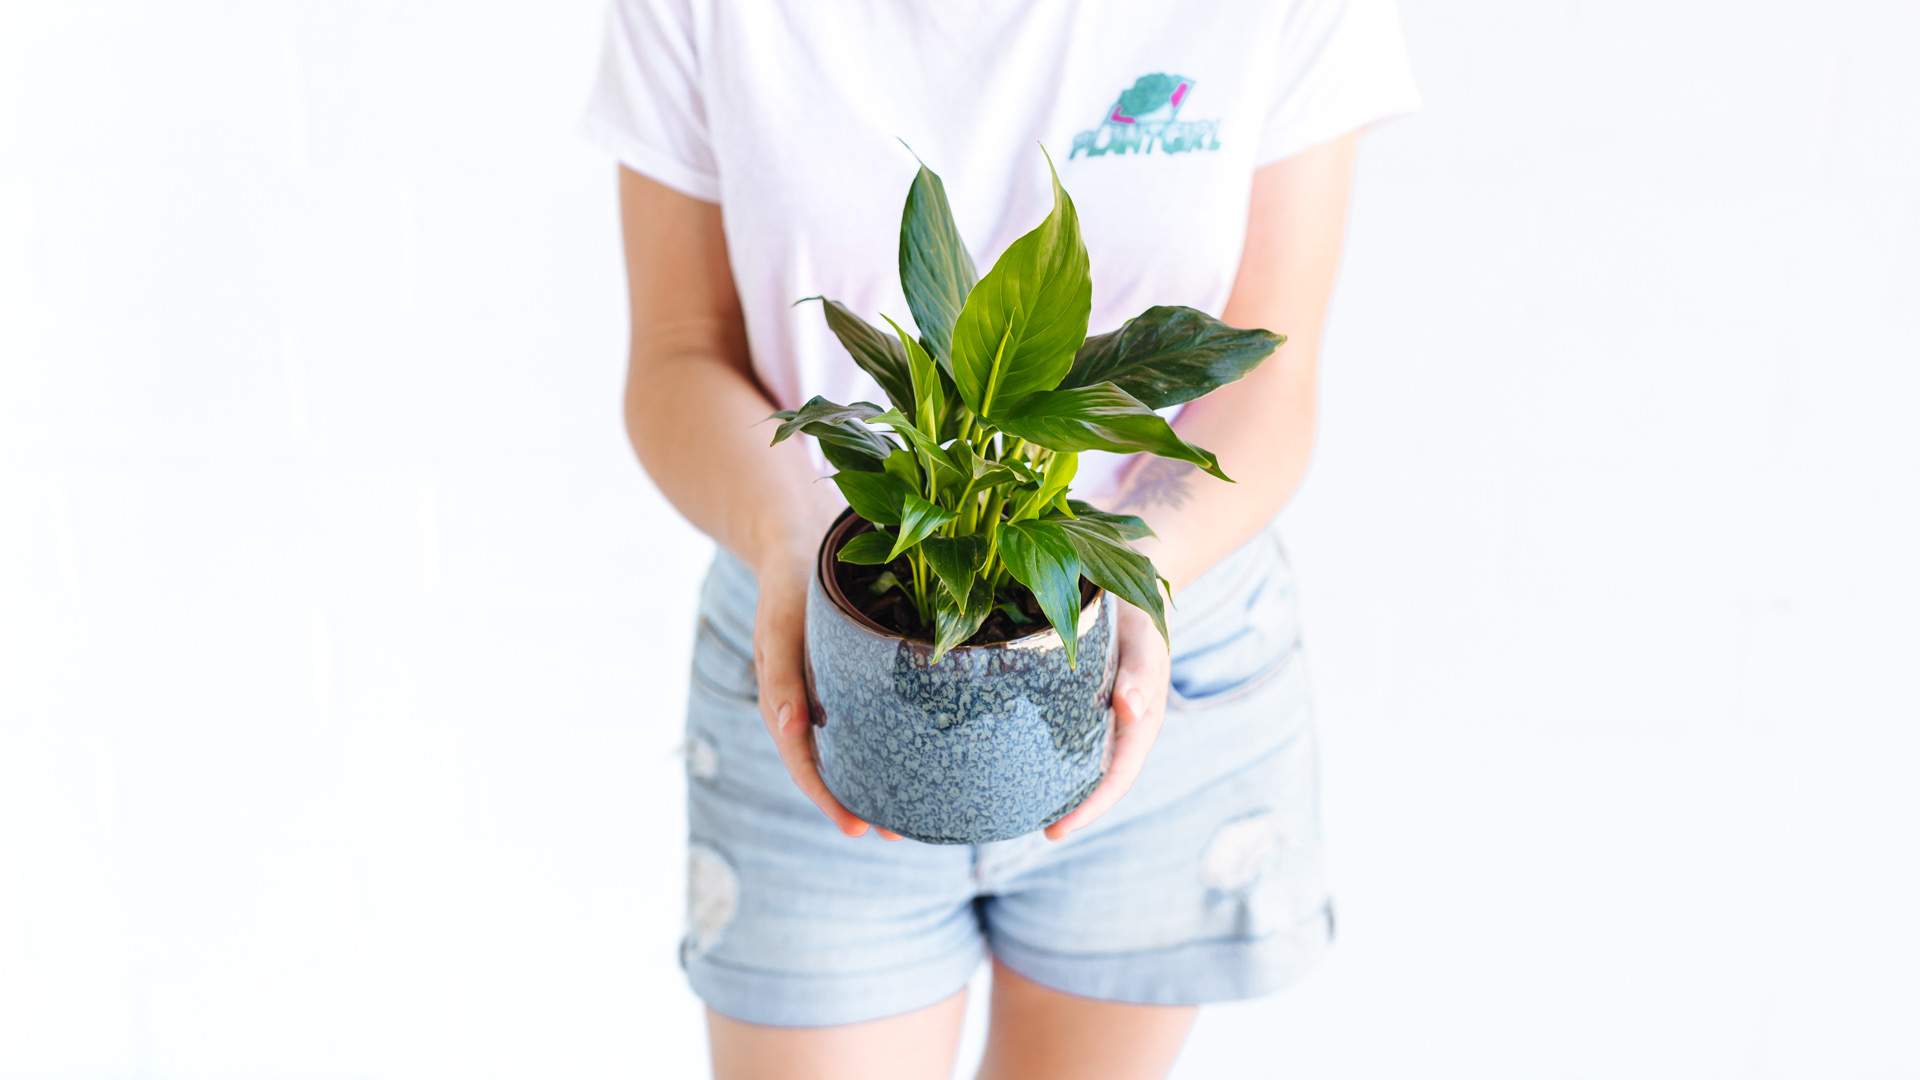 Sydney's Same-Day Plant Delivery Service Has Opened a Bricks-and-Mortar Shop in Marrickville